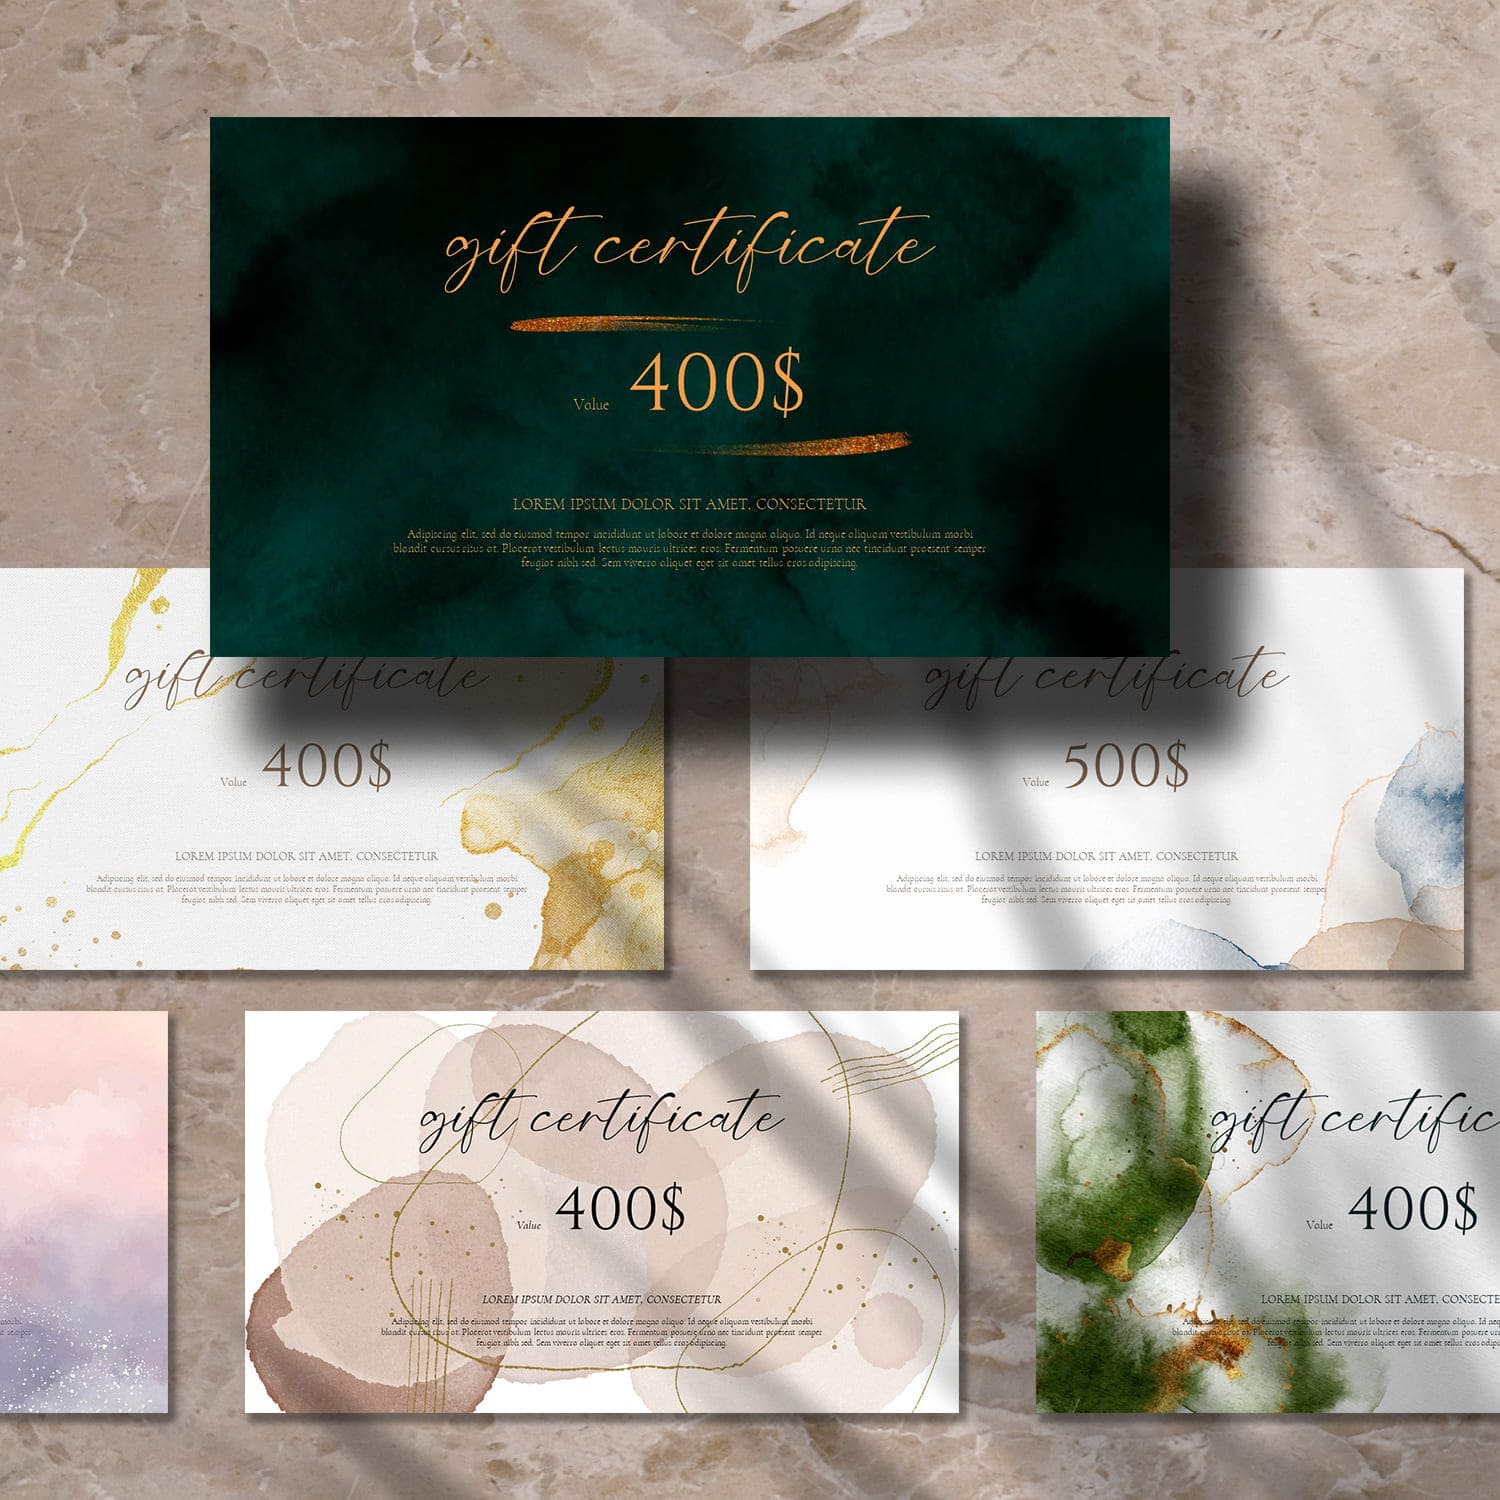 Powerpoint gift certificate template, second picture 1500x1500.